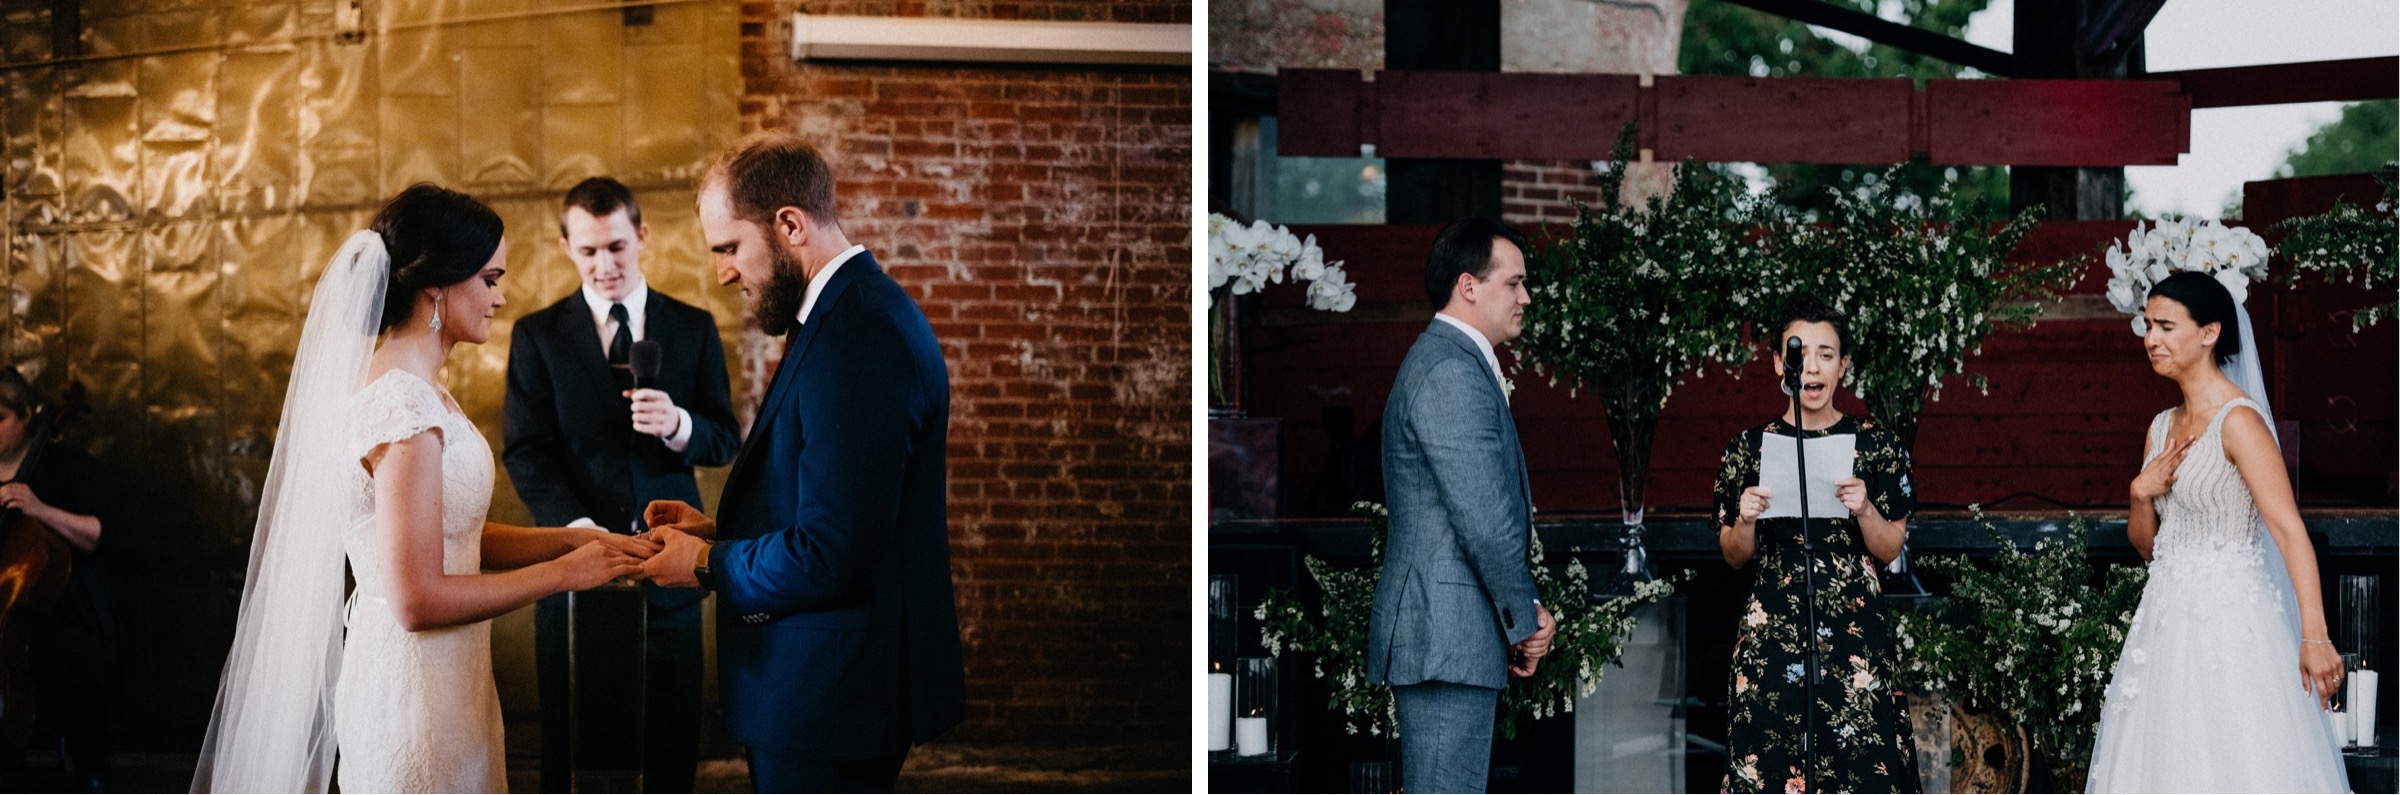 A couple gets very emotional during their vows during the ceremony portion of a wedding day timeline